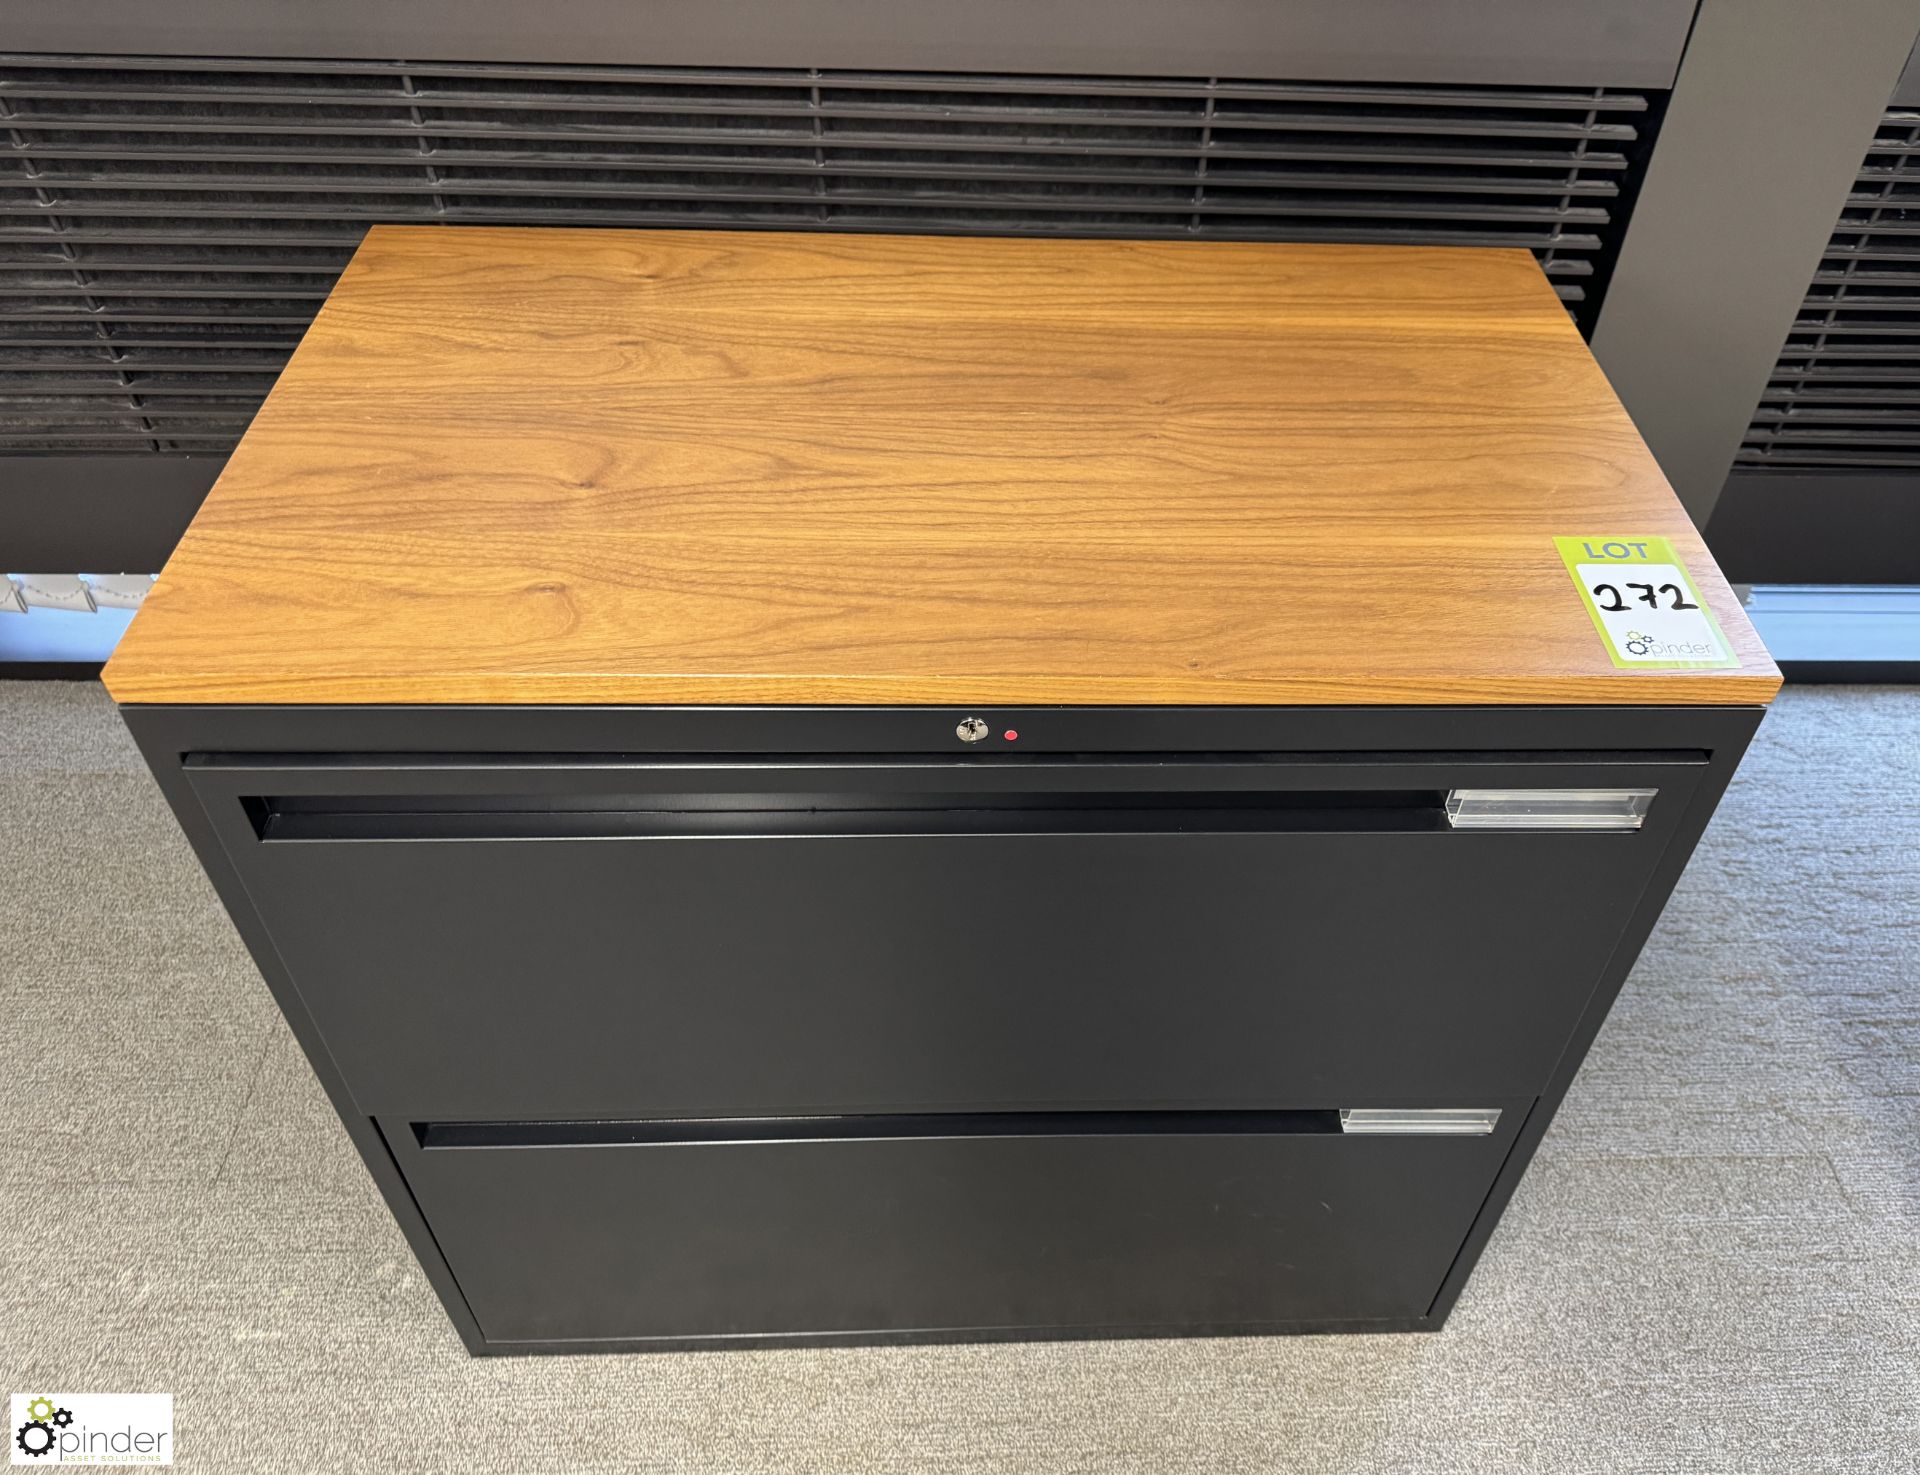 Maine steel 2-door lateral Filing Cabinet, 800mm x 450mm x 730mm, with cherry veneer top (location - Image 2 of 4